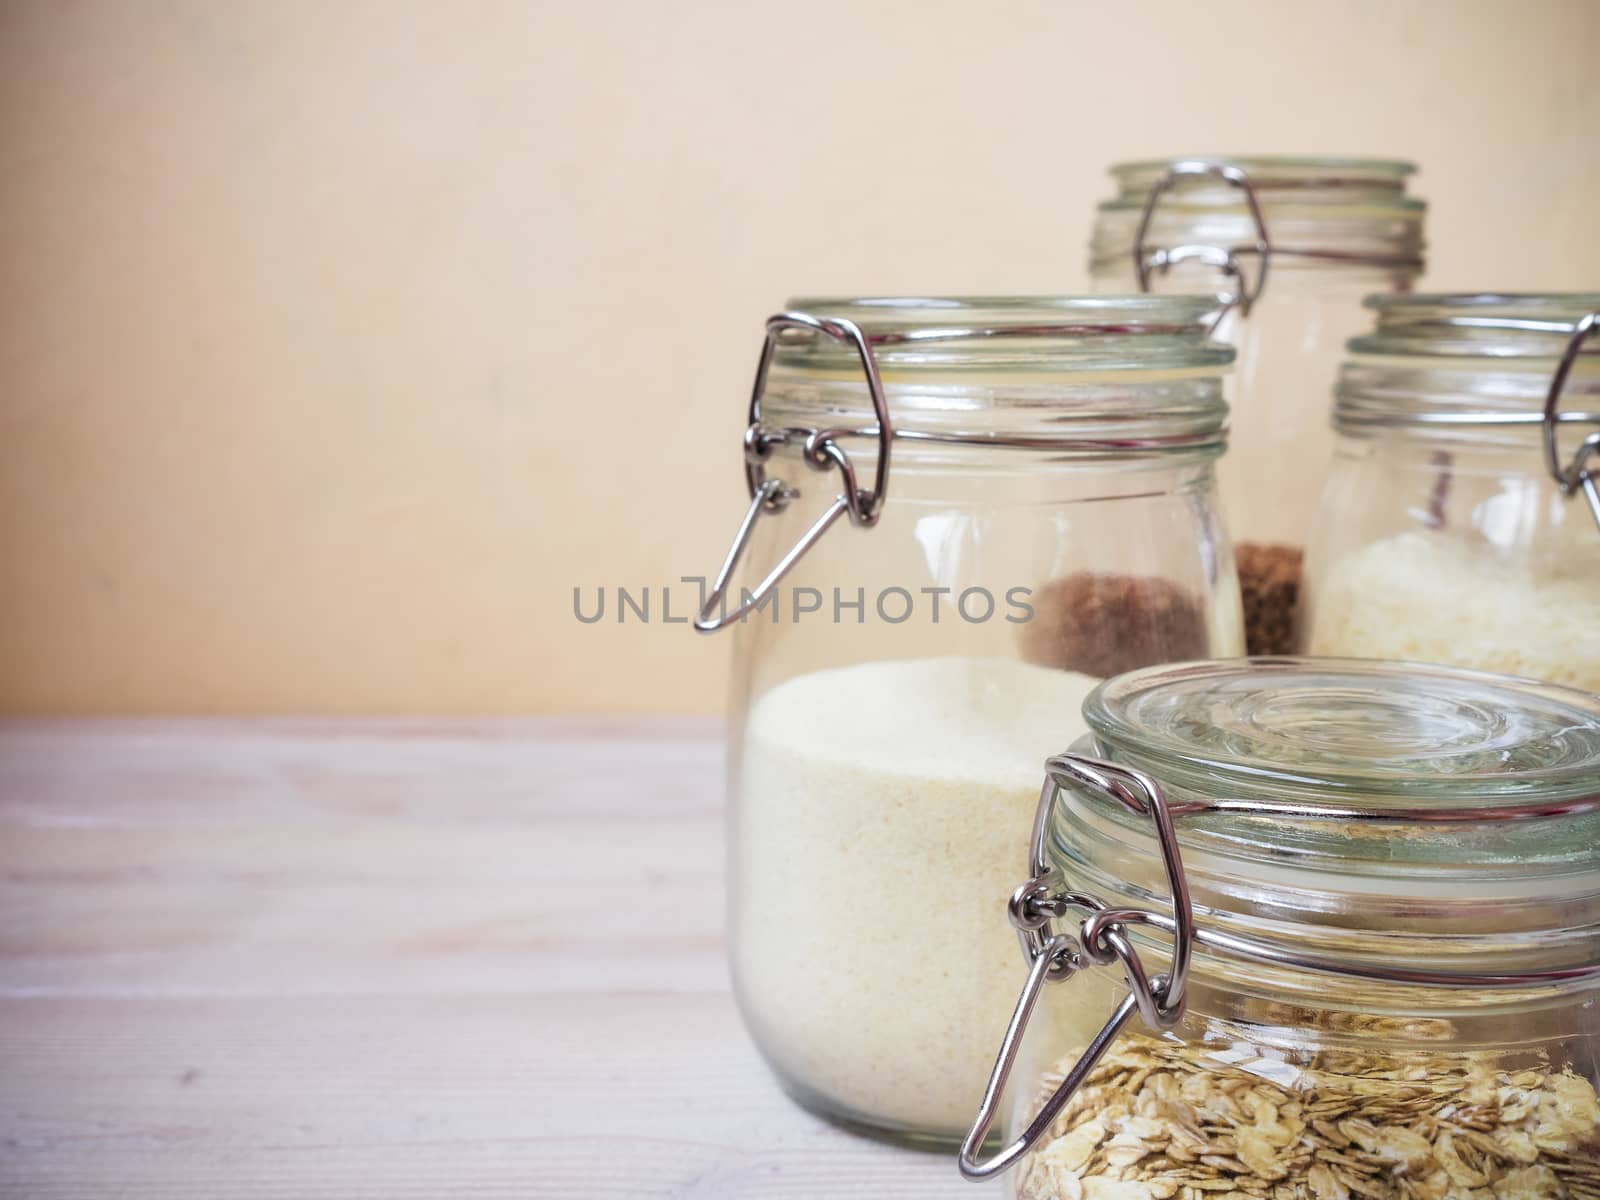 Cereals and grains in glass jars standing on the table